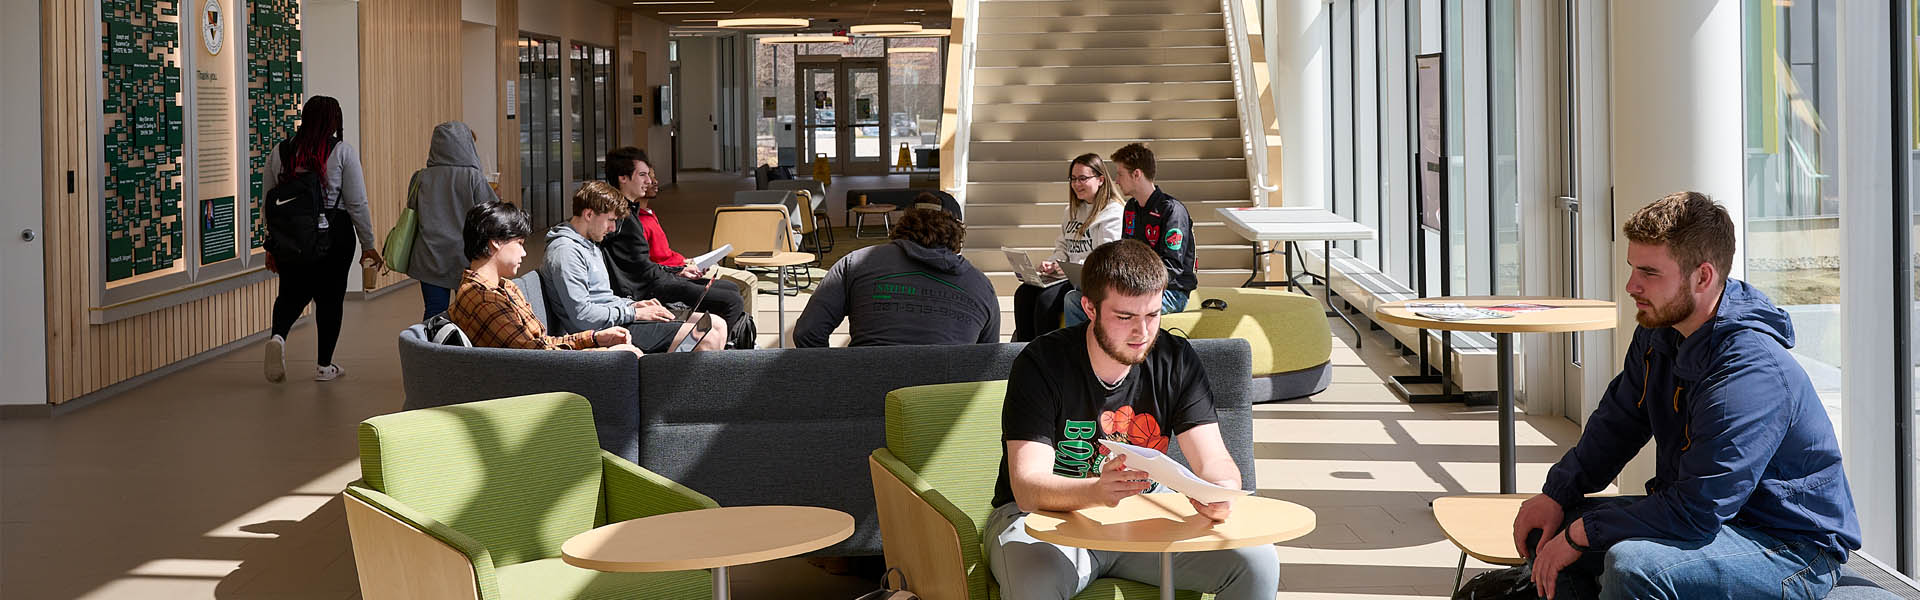 Students study in Harold Alfond Hall